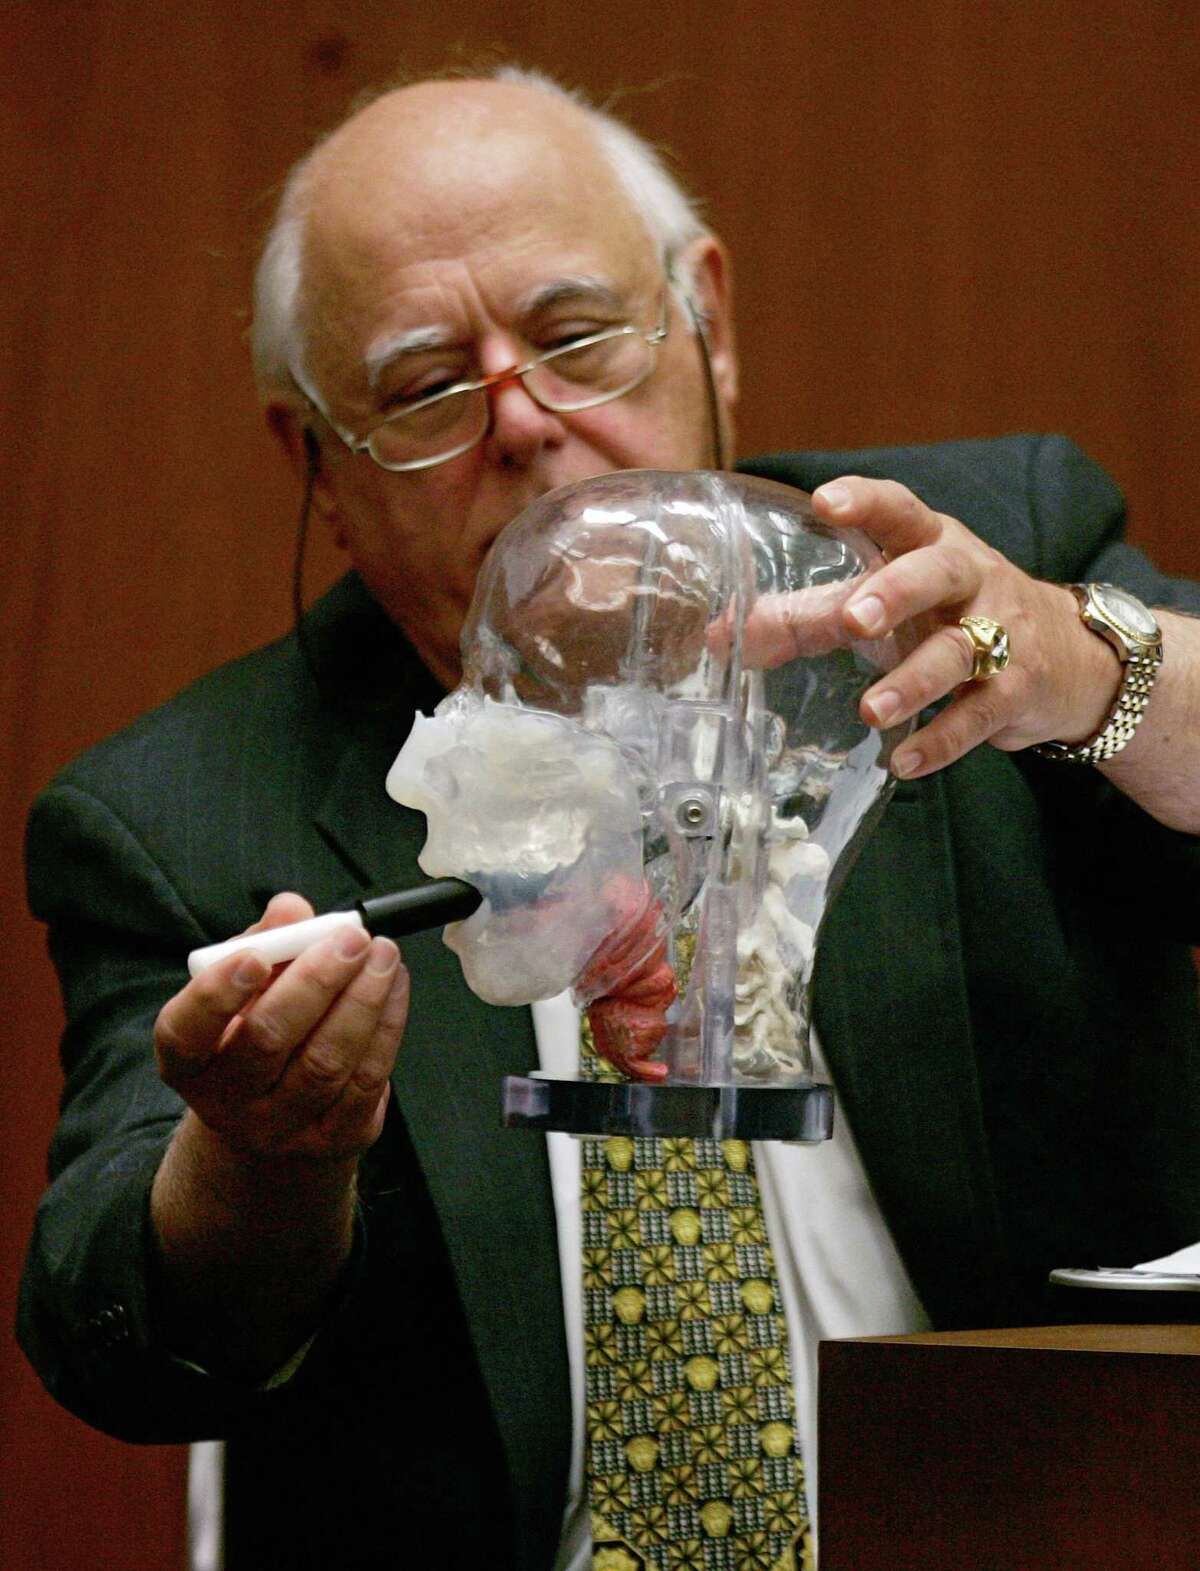 PhD. Gunshot wound forensic expert Vincent Di Maio (right), who testified for the defense during the murder trial of music producer Phil Spector, introduced a plastic stick to show the mouth of a plastic head model Internal self-oral gunshot wound Wednesday, June 27, 2007, Los Angeles.  Spector is accused of killing actress Lana Clarkson in February 2003.  (AP Photo/Damian Dovarganes, Poland)